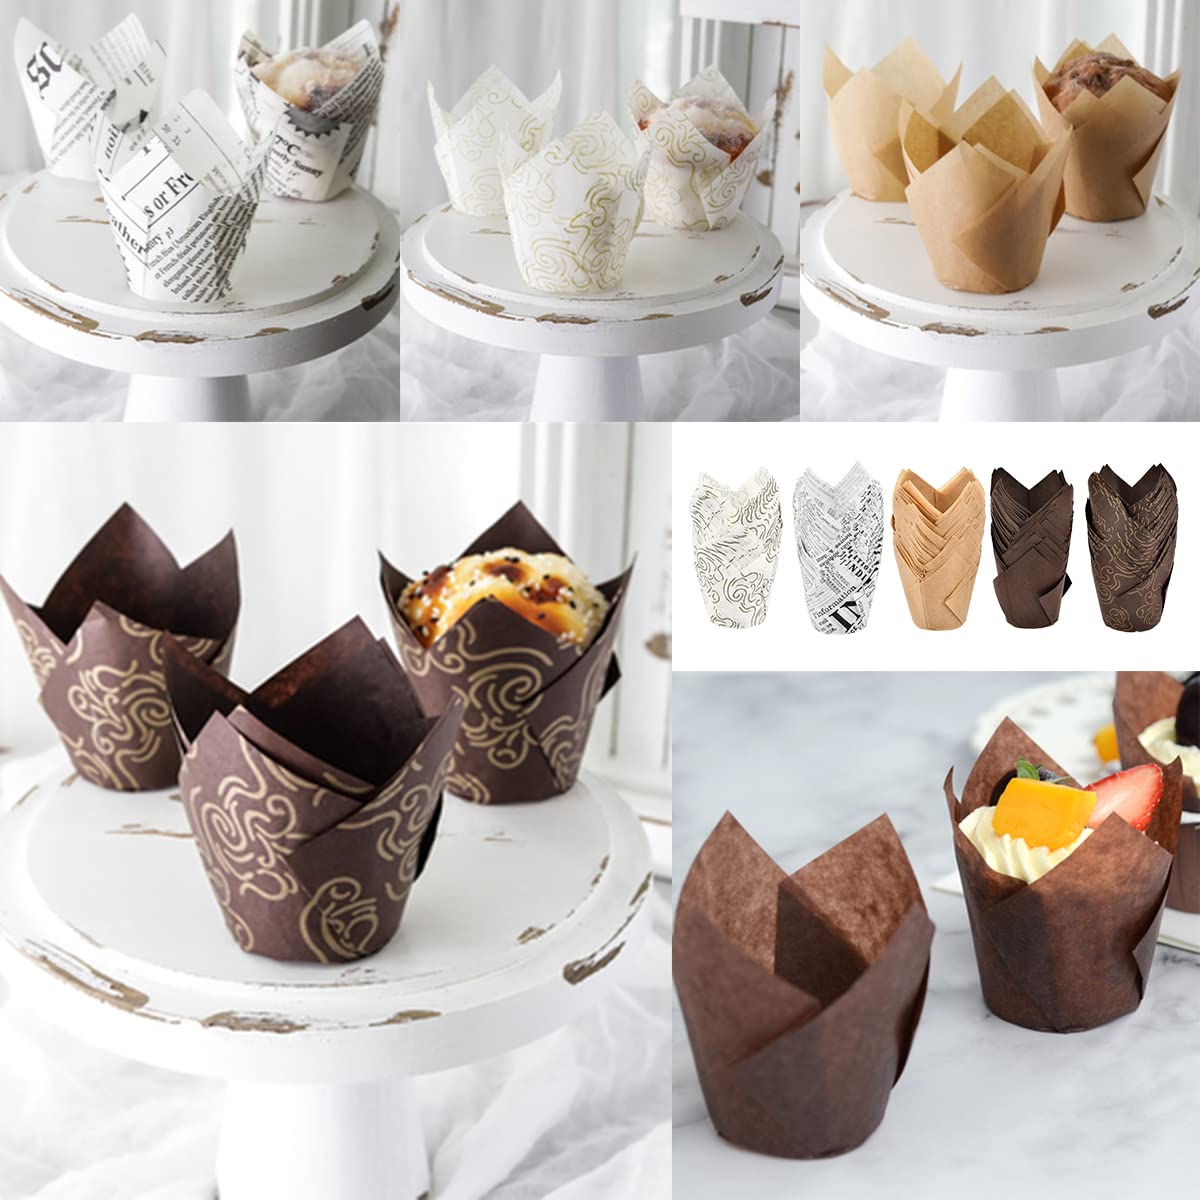 FOCCTS Tulip Cupcake Liners 200PCS, Muffin Cups Paper, Tulip Baking Cups Printed, Grease-resistant Baking Cups for Birthday Wedding Party, Cake Liner Wrappers, Paper Muffin Liners White Brown Natural